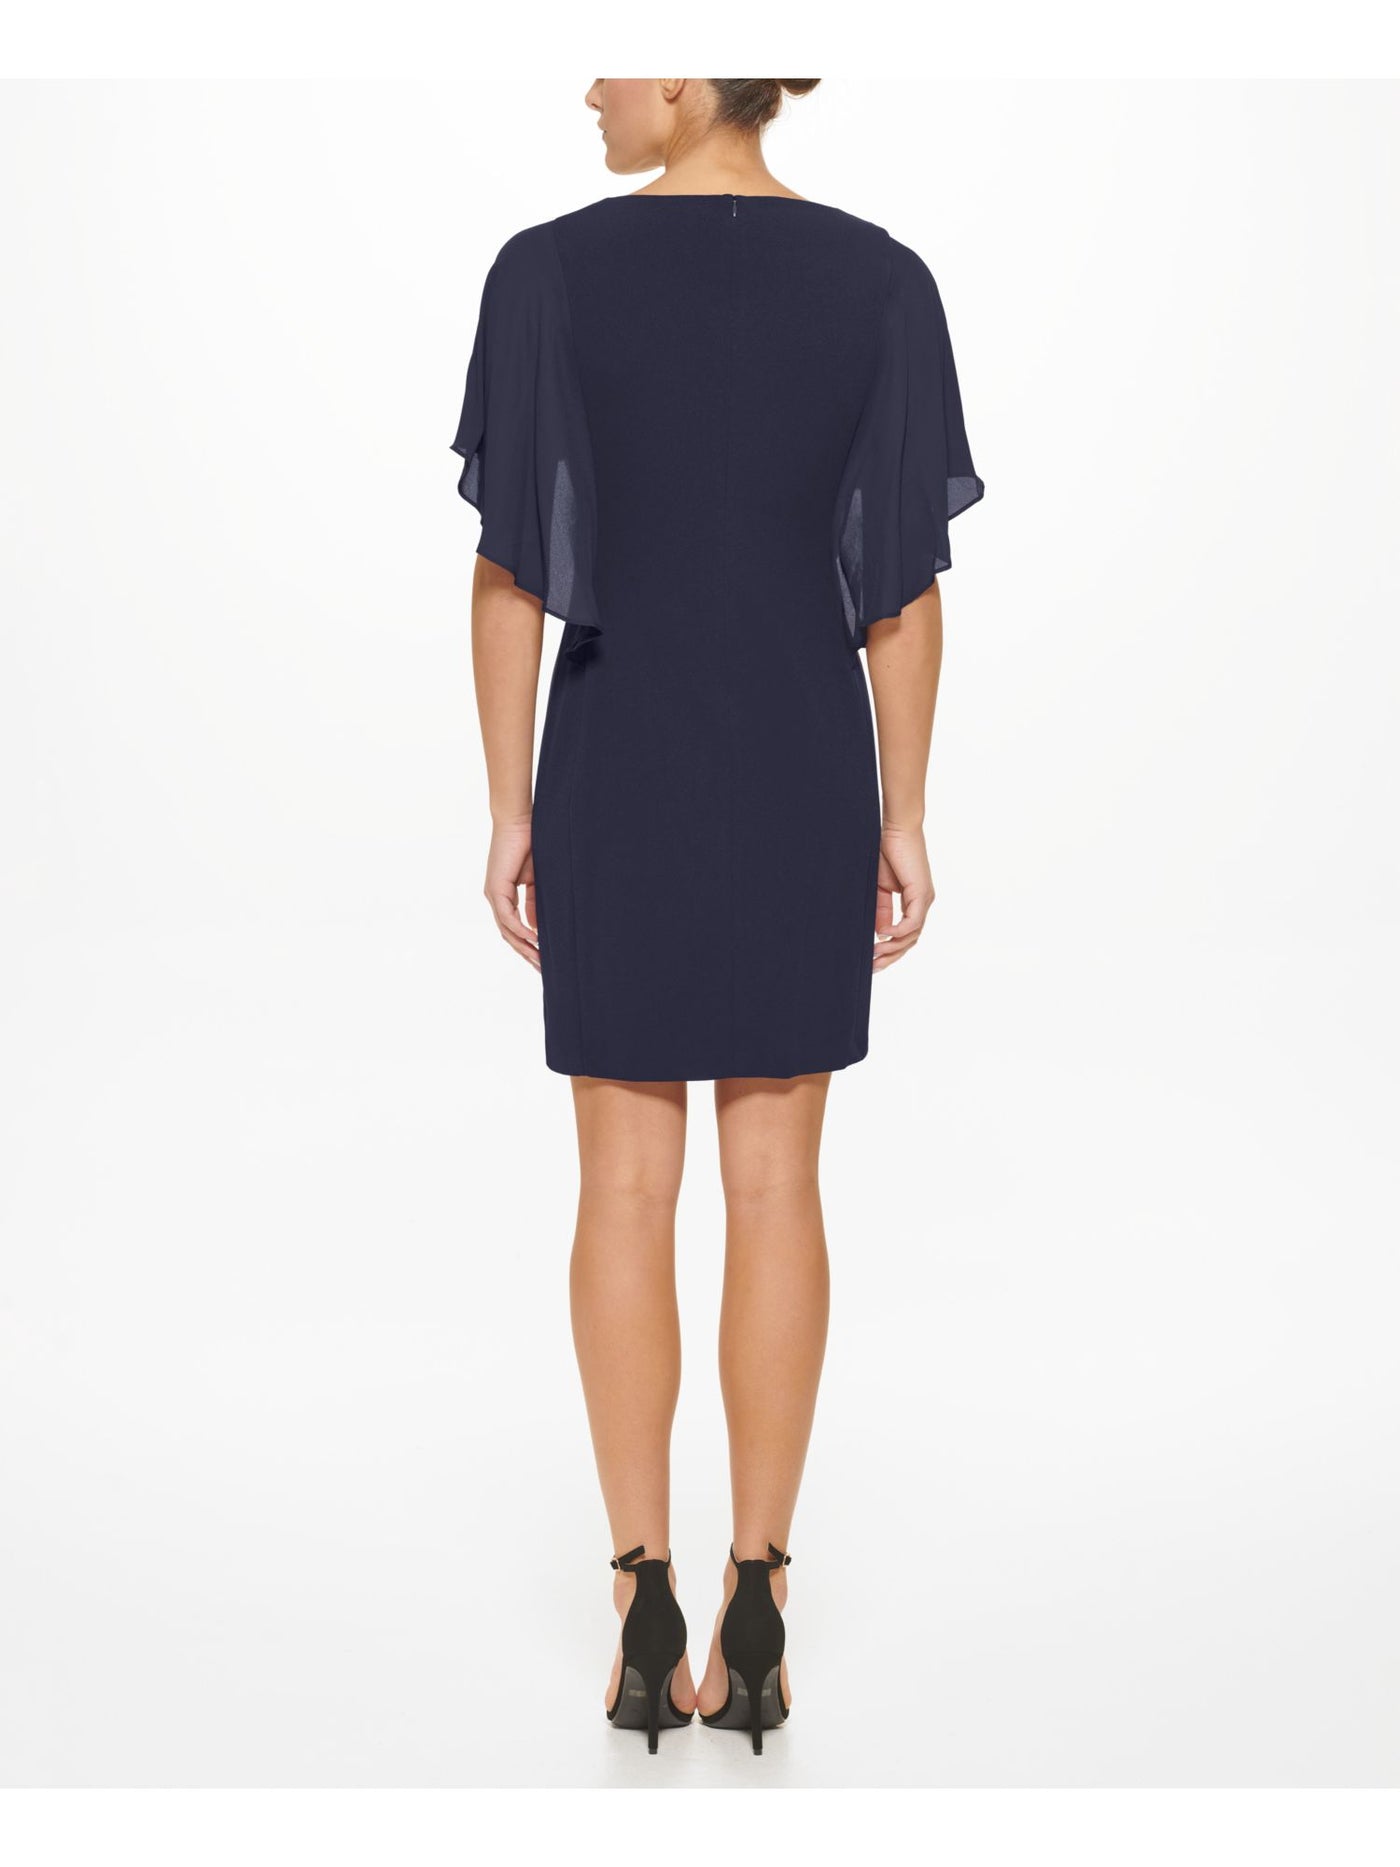 DKNY Womens Navy Zippered Overlaid Cape Effect Flutter Sleeve Round Neck Above The Knee Cocktail Sheath Dress 8